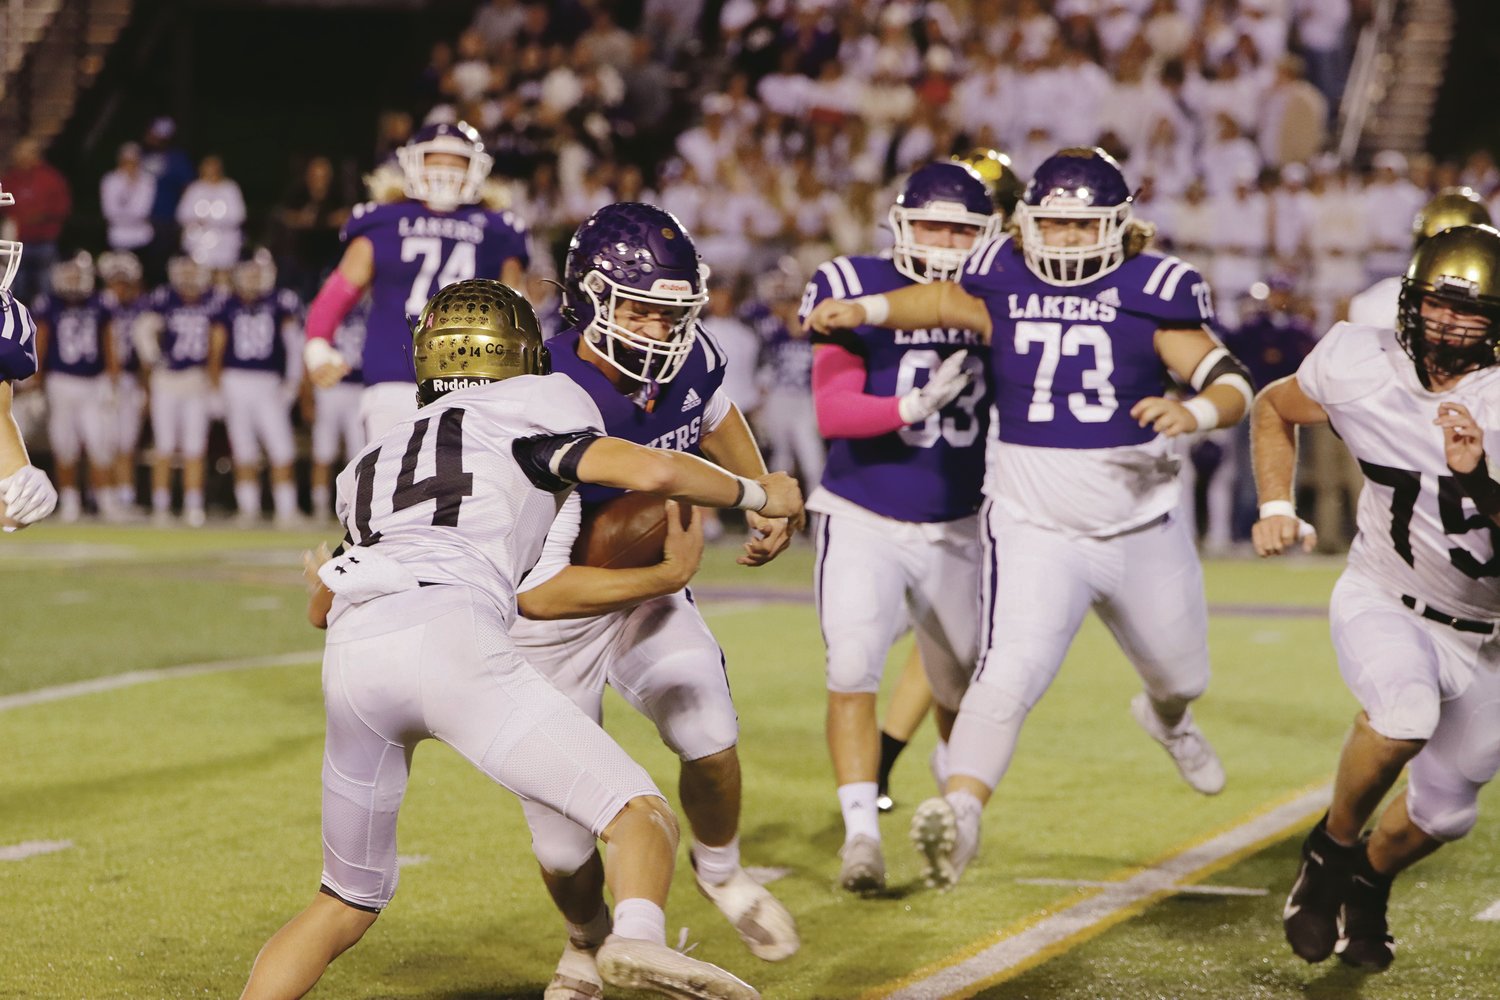 Camdenton’s Kam Durnin makes a run while Lebanon’s Drew Bowling (14) attempts to make a tackle.